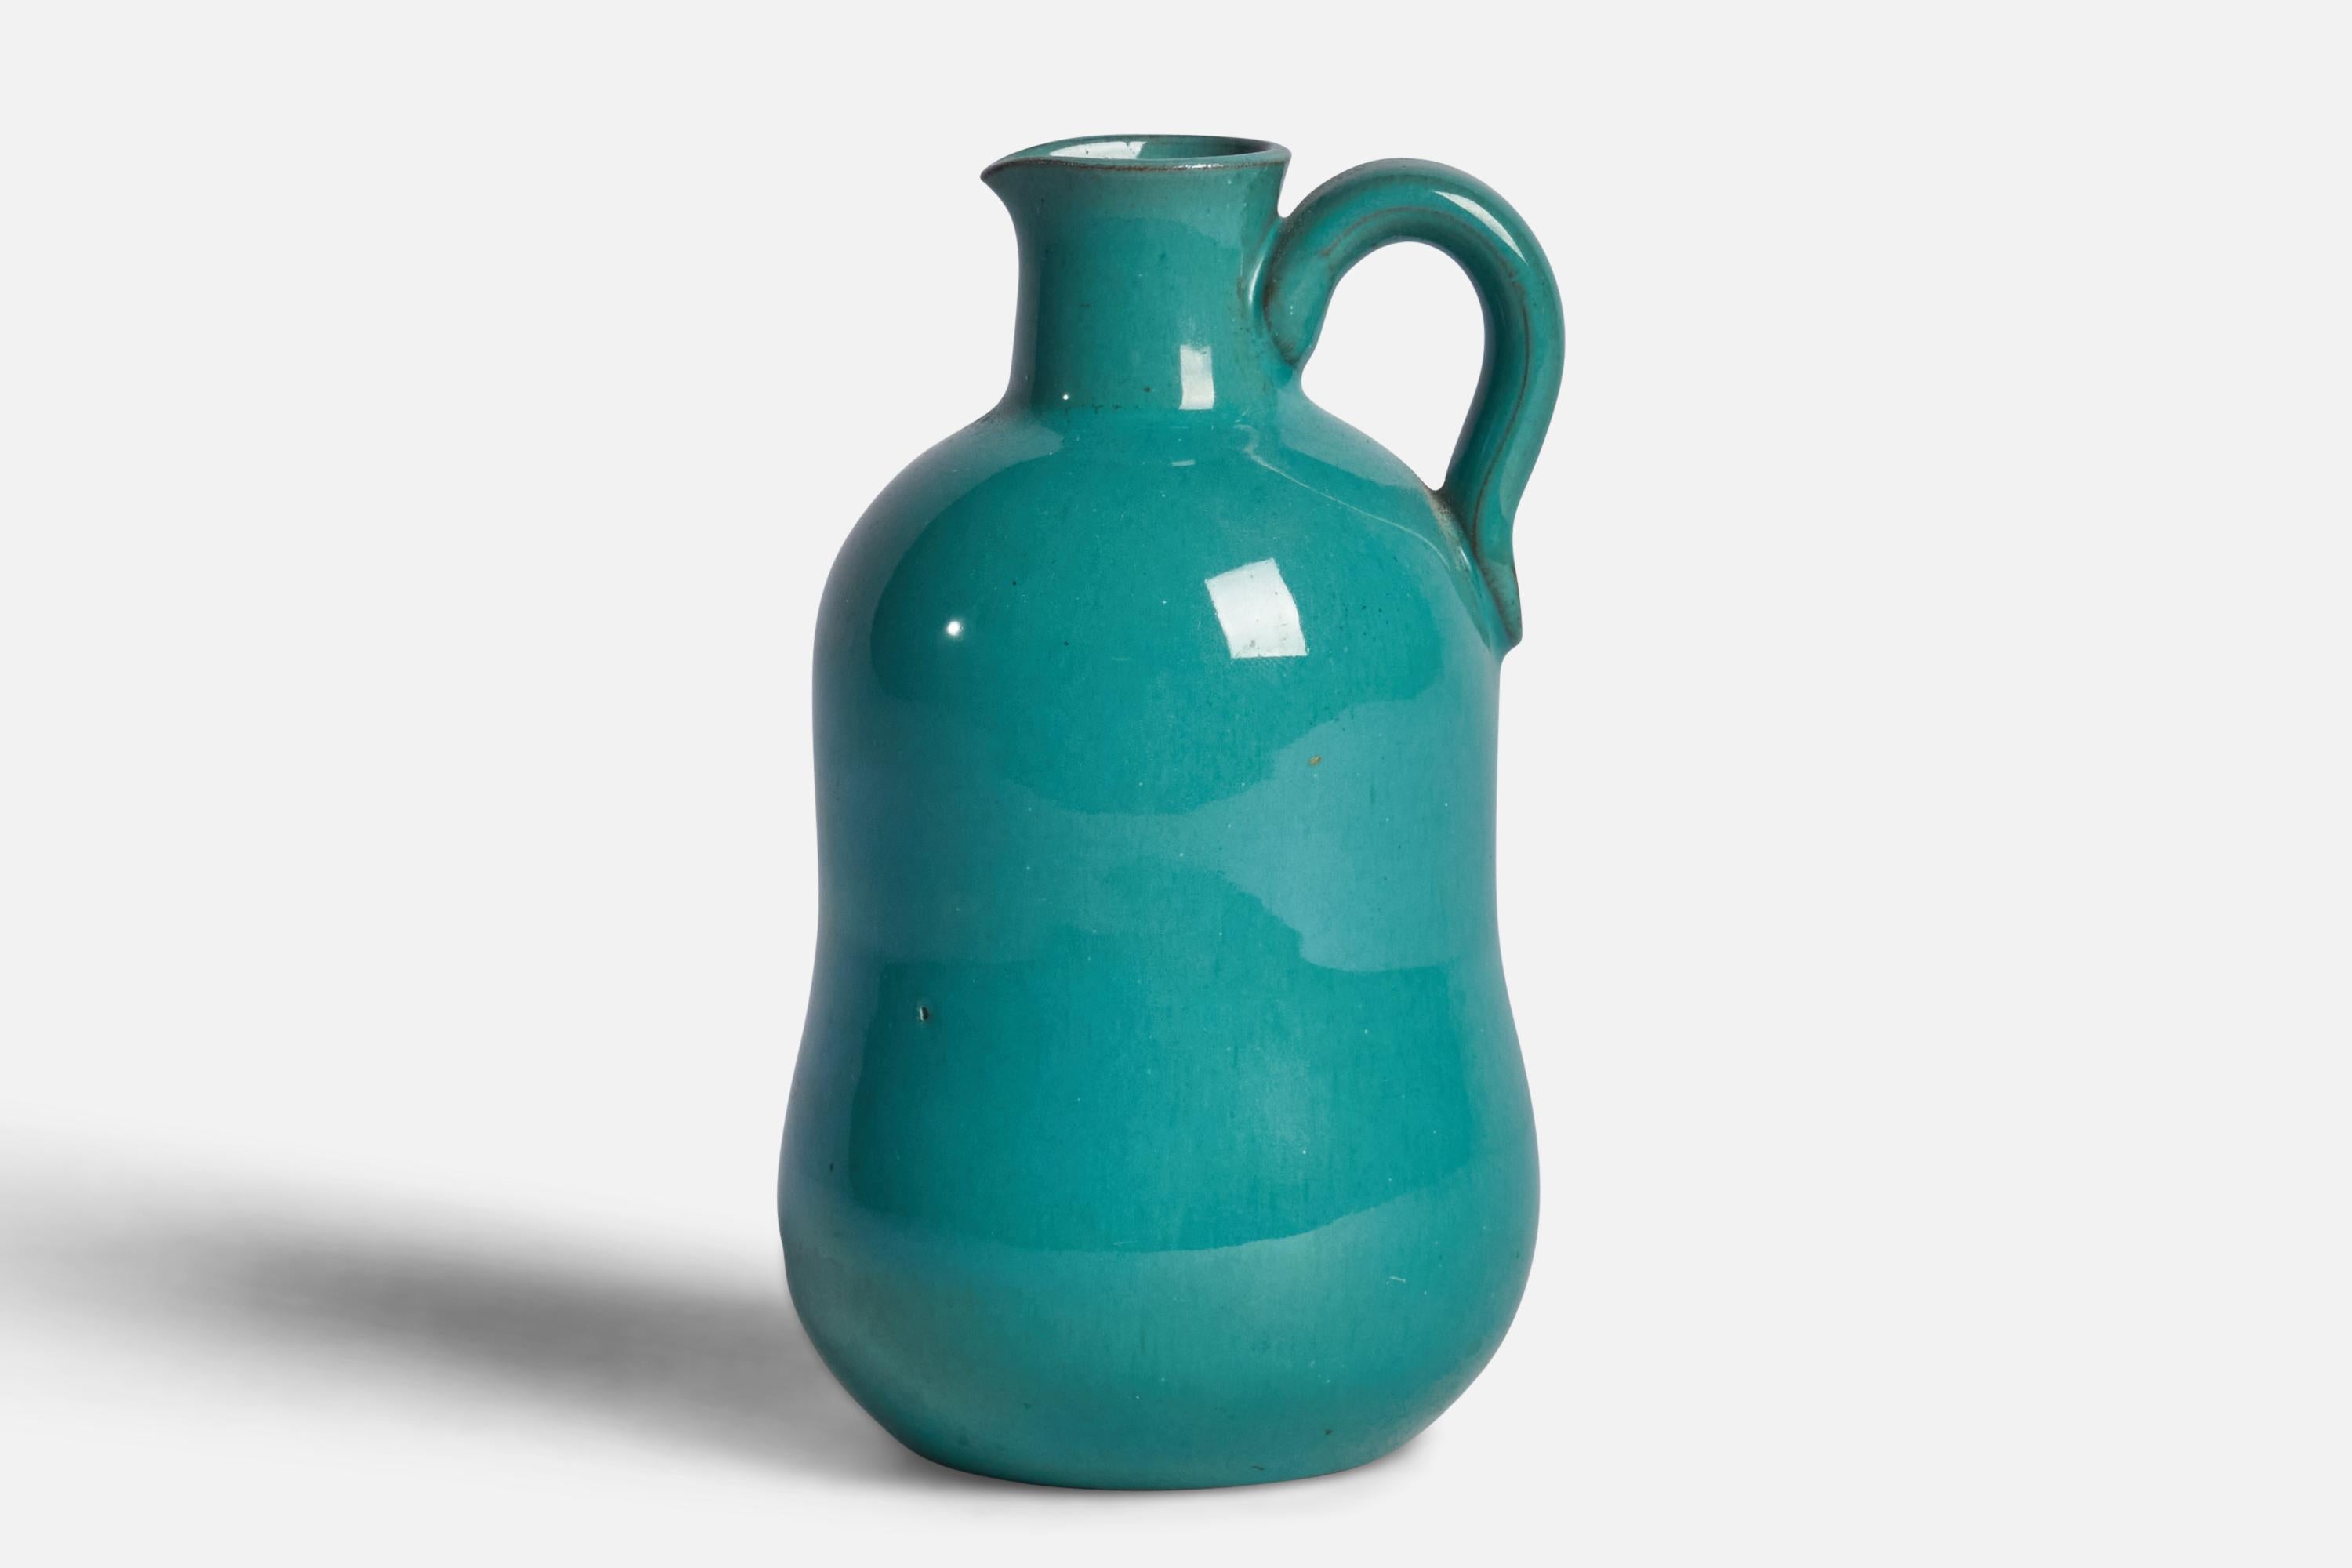 A small blue-glazed stoneware pitcher designed and produced by Andersson & Johansson, Sweden, 1940s.